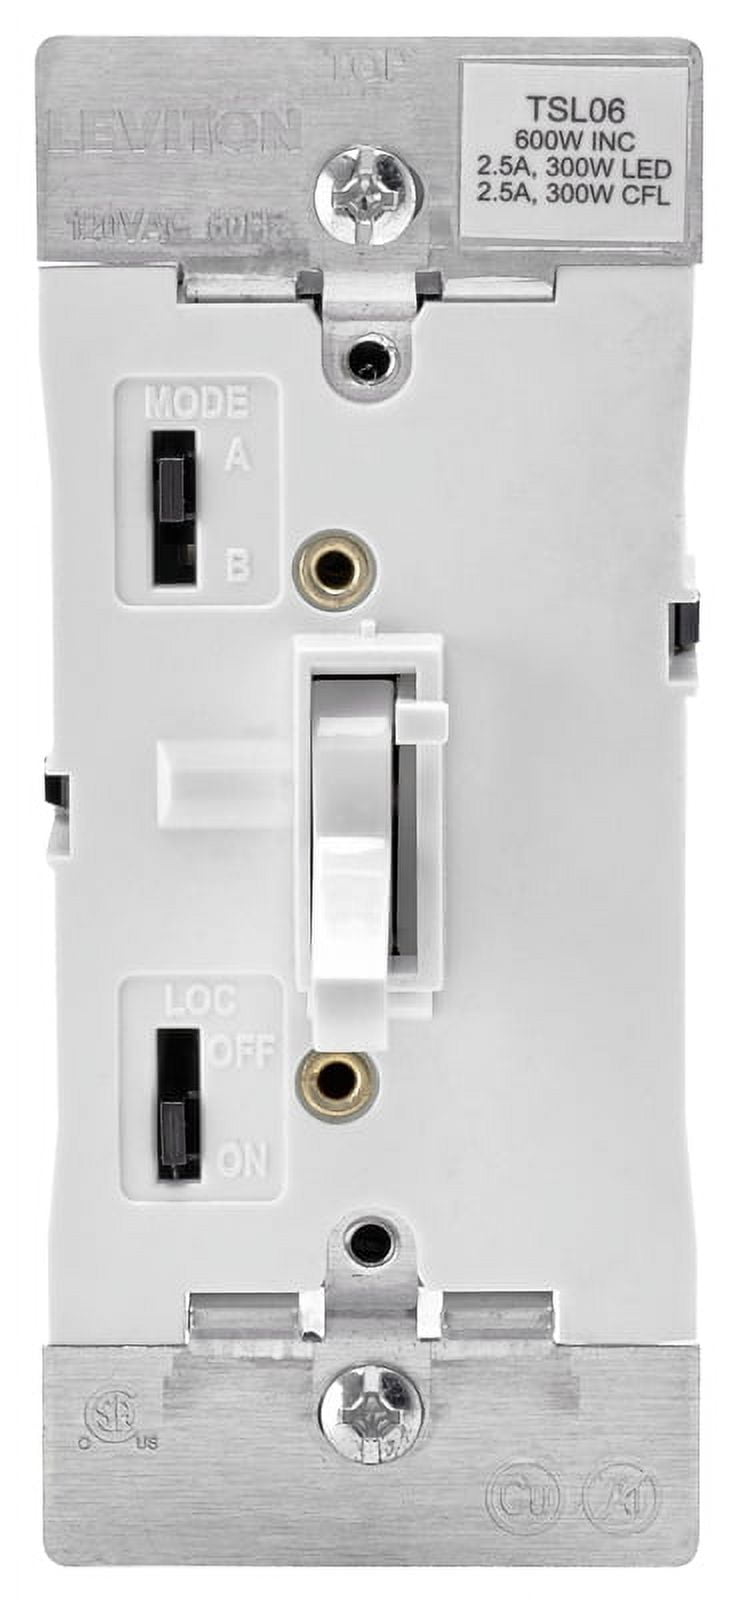 Leviton 3775350 2.5 Amp 600w-120vac Incandescent Toggle Dimmer Switch White